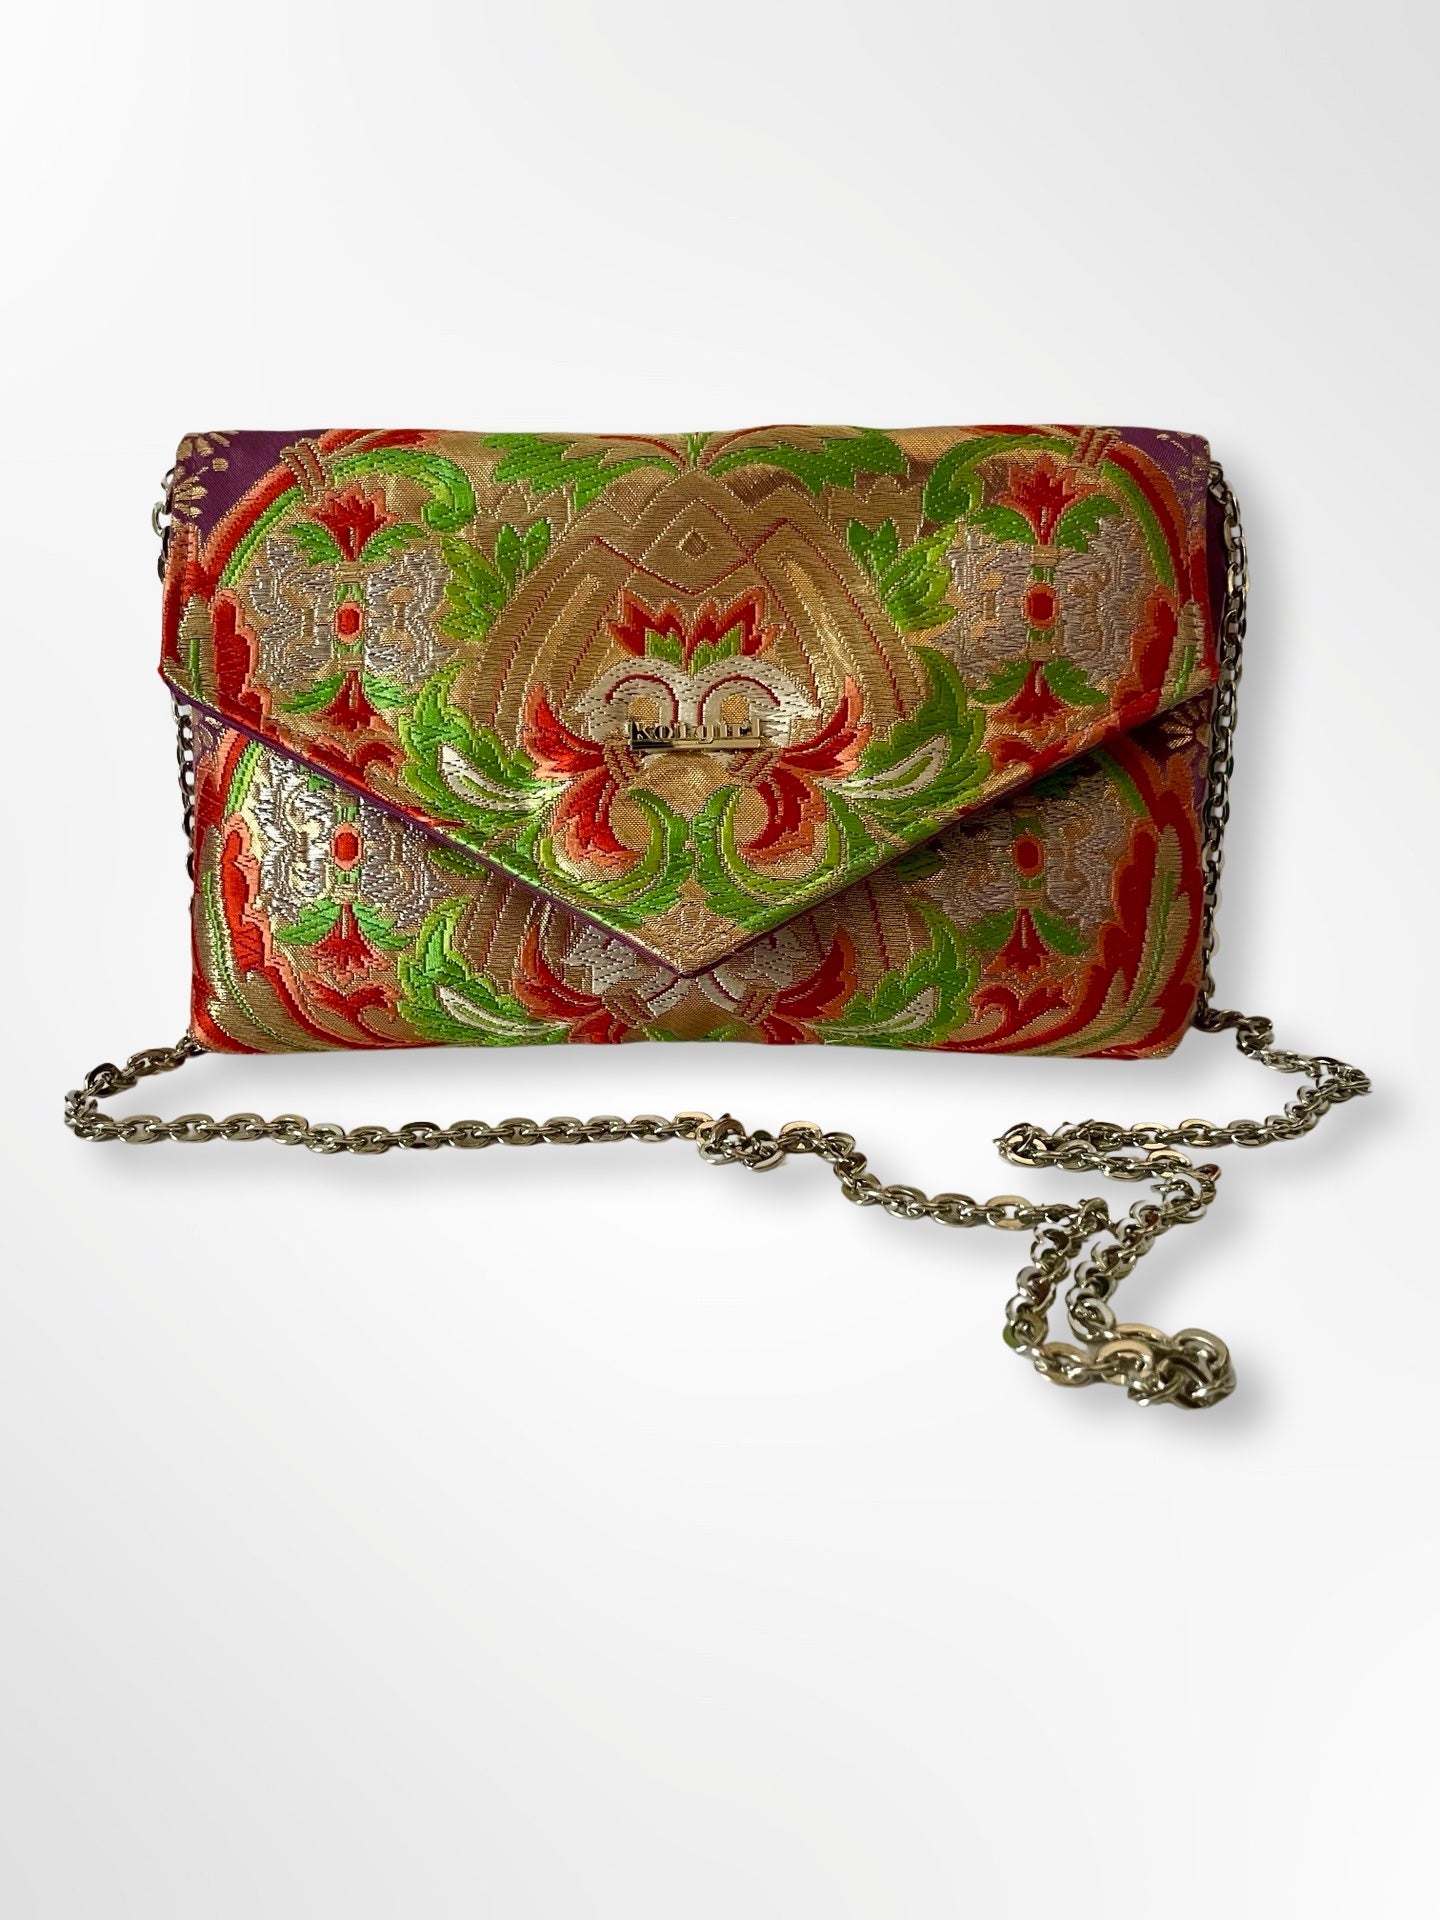 Embroidered Floral and Leaves Clutch